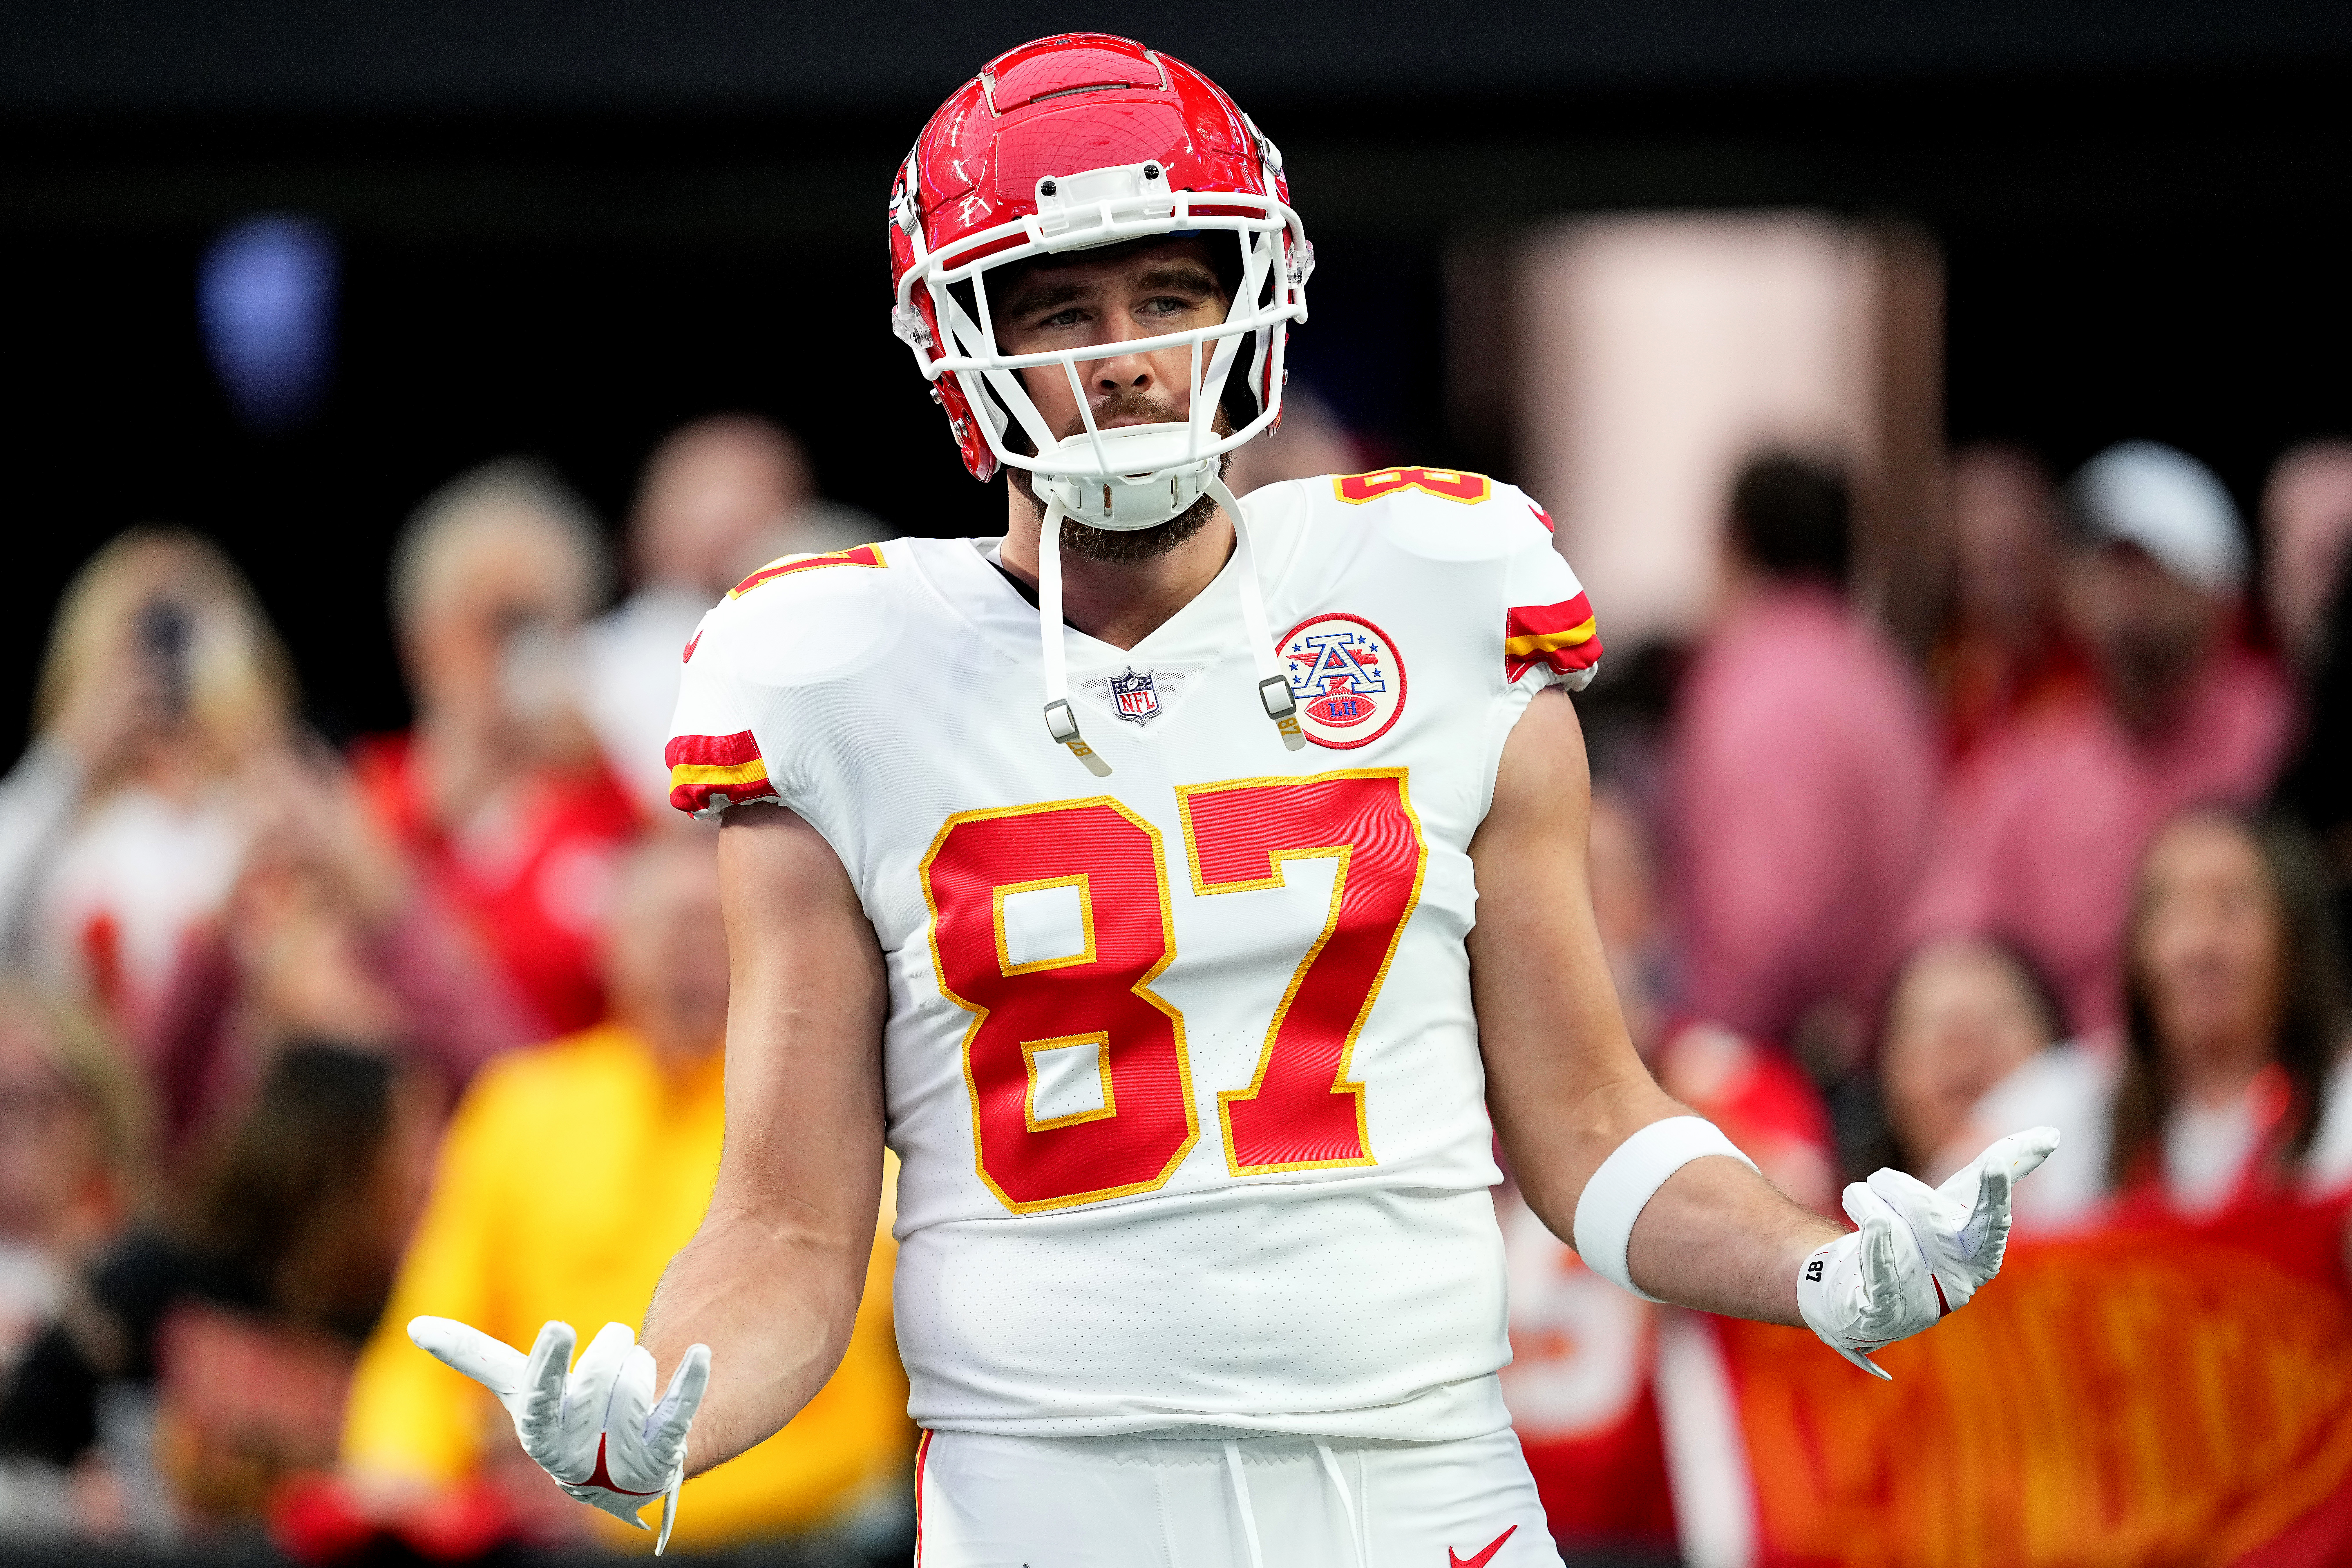 Travis Kelce #87 of the Kansas City Chiefs warms up prior to a game against the Las Vegas Raiders at Allegiant Stadium on January 07, 2023 in Las Vegas, Nevada.